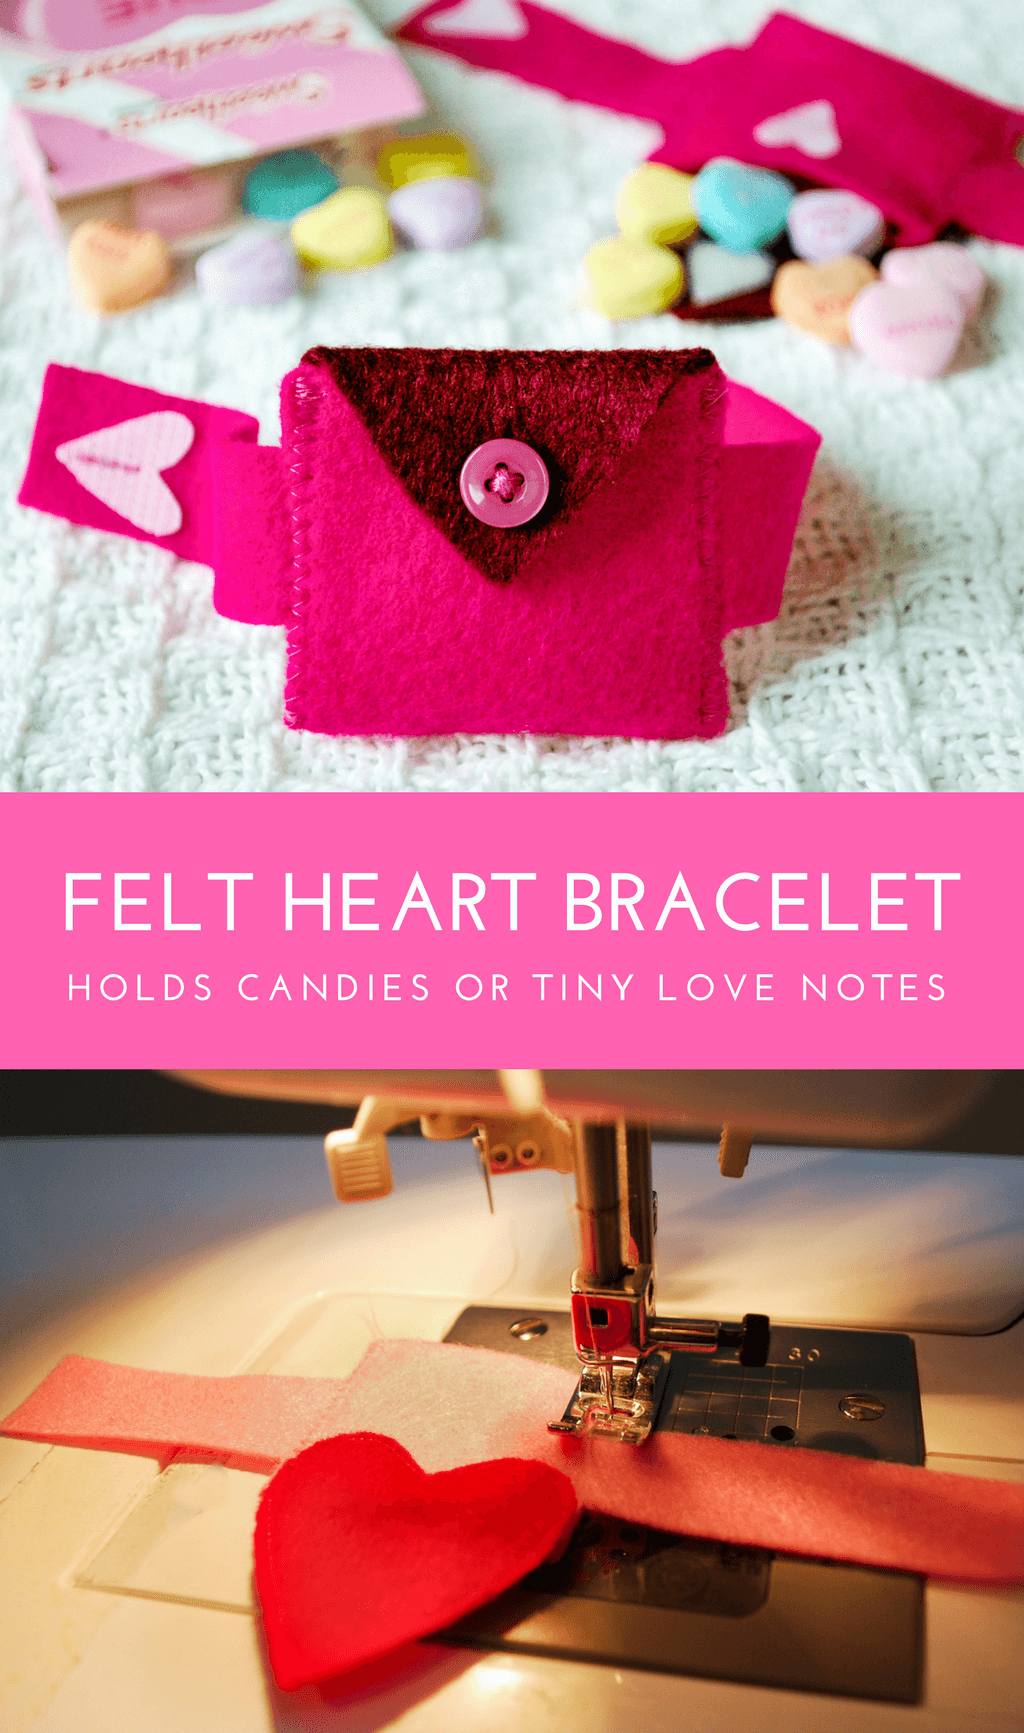 DIY Valentine’s Day Felt Heart Pocket Bracelet. Easy to sew by hand or on a sewing machine. The heart-shaped pocket holds candies or a teeny love note. Make this Valentine's Day gift for the sweet kid in your life! #valentinesday #valentine #felt #sewing